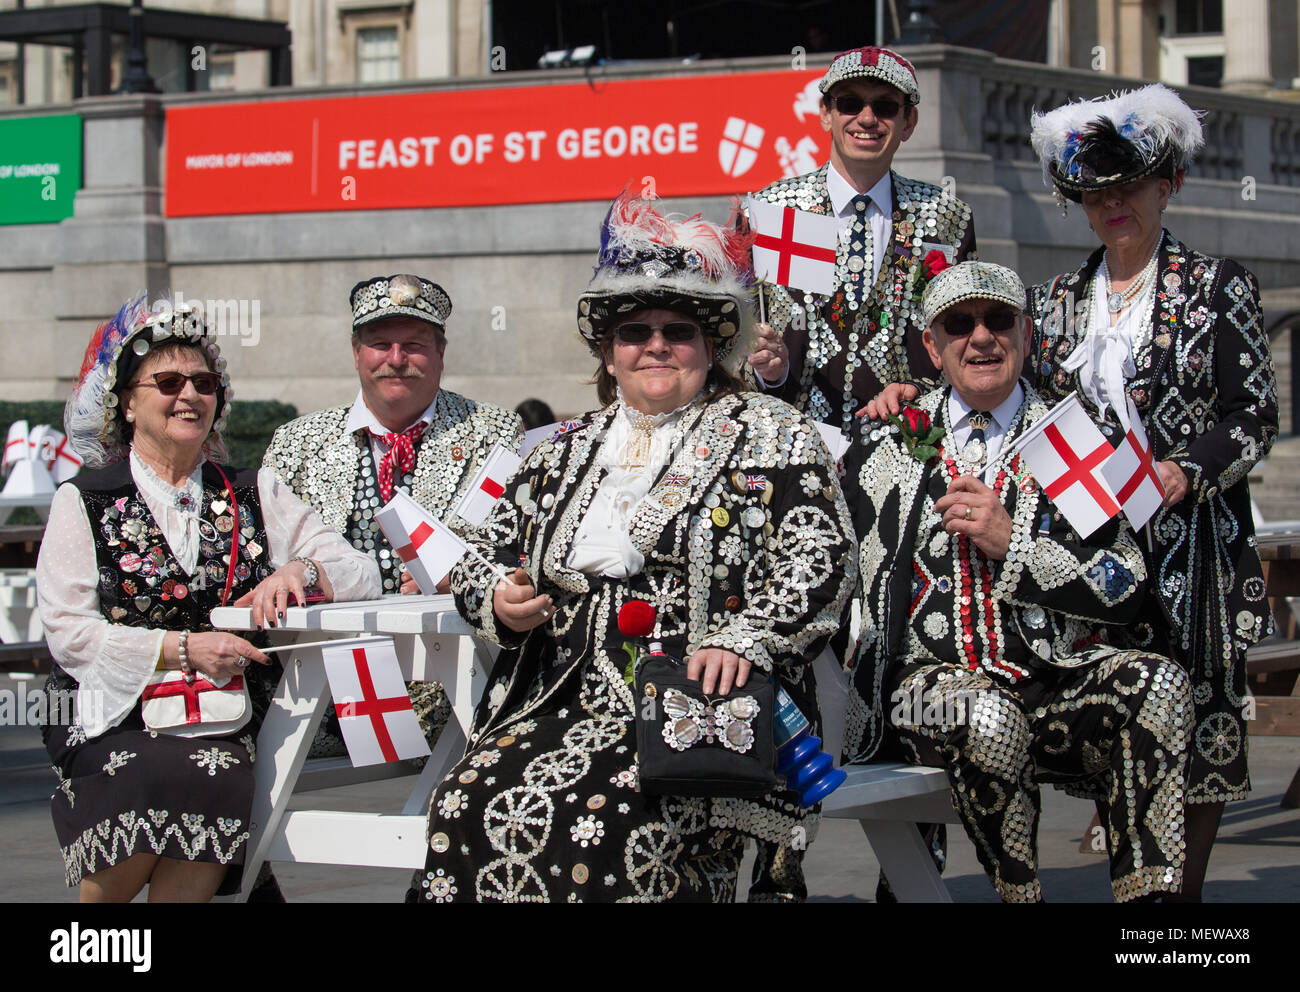 Pearly Kings and Queens in Trafalgar Square for the Feast of St George to celebrate St George's Day, the Patron Saint of England which is on April 23r. Stock Photo